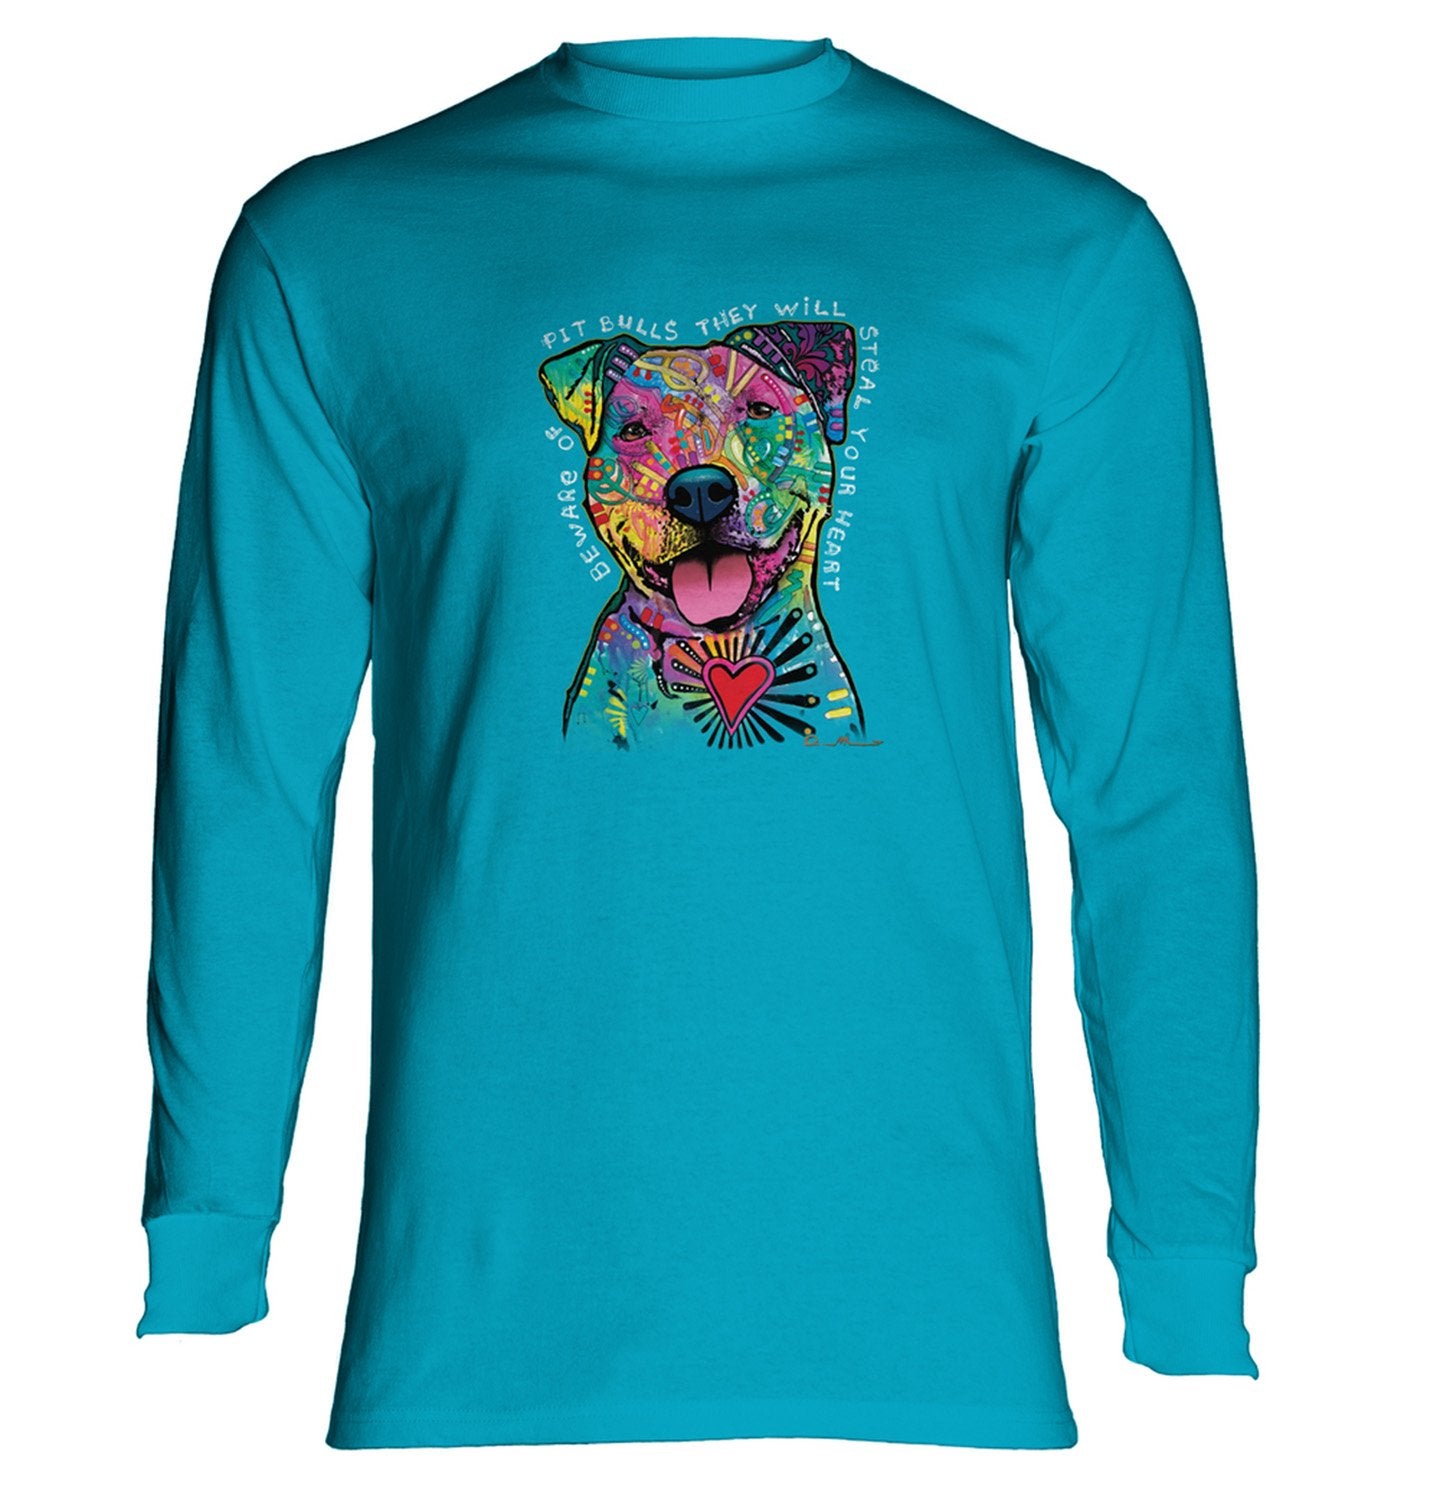 Animal Pride - Steal Your Heart - Adult Unisex Long Sleeve T-Shirt